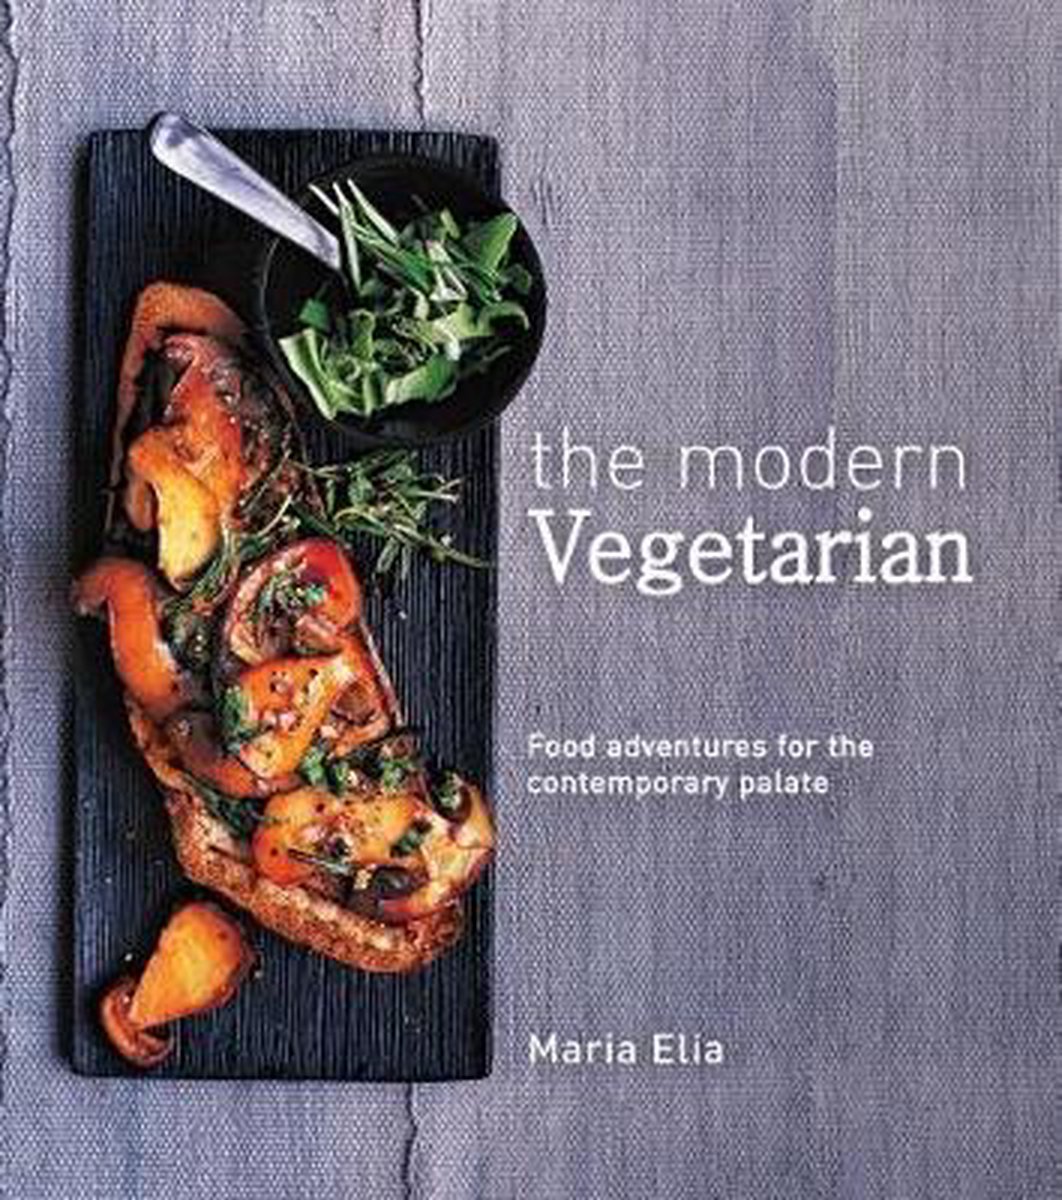 The Modern Vegetarian Food adventures for the contemporary palate